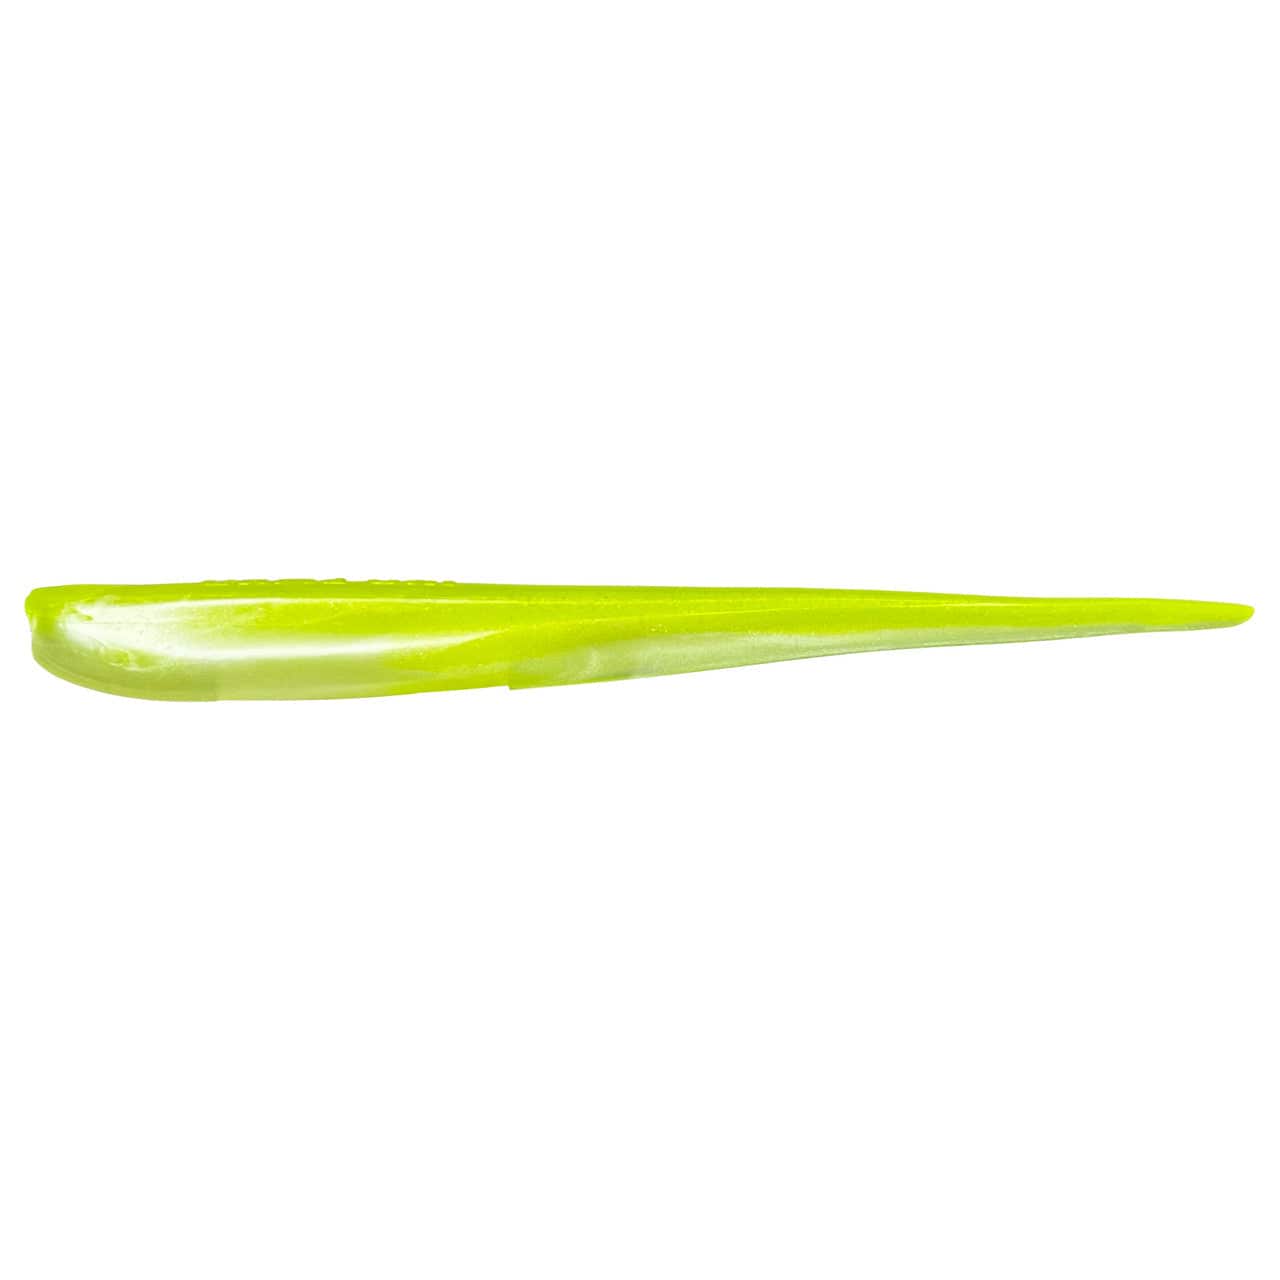 Game On Lures DuraTech Eel Chartreuse/Pearl White / 10"